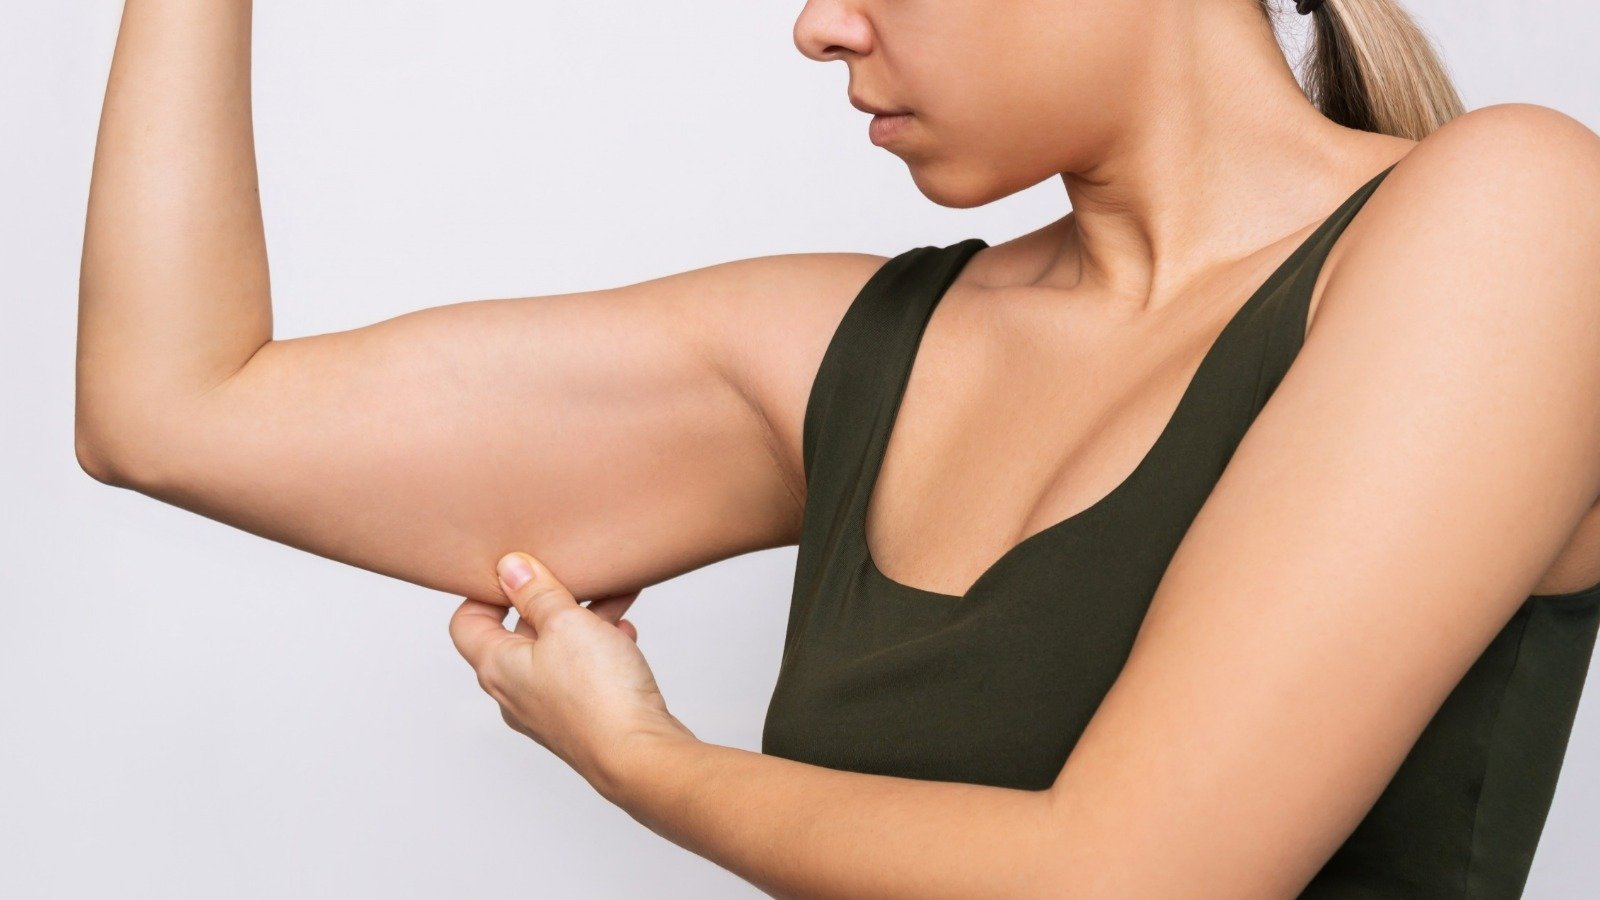 The Best Exercises To Help Get Rid Of Underarm Fat